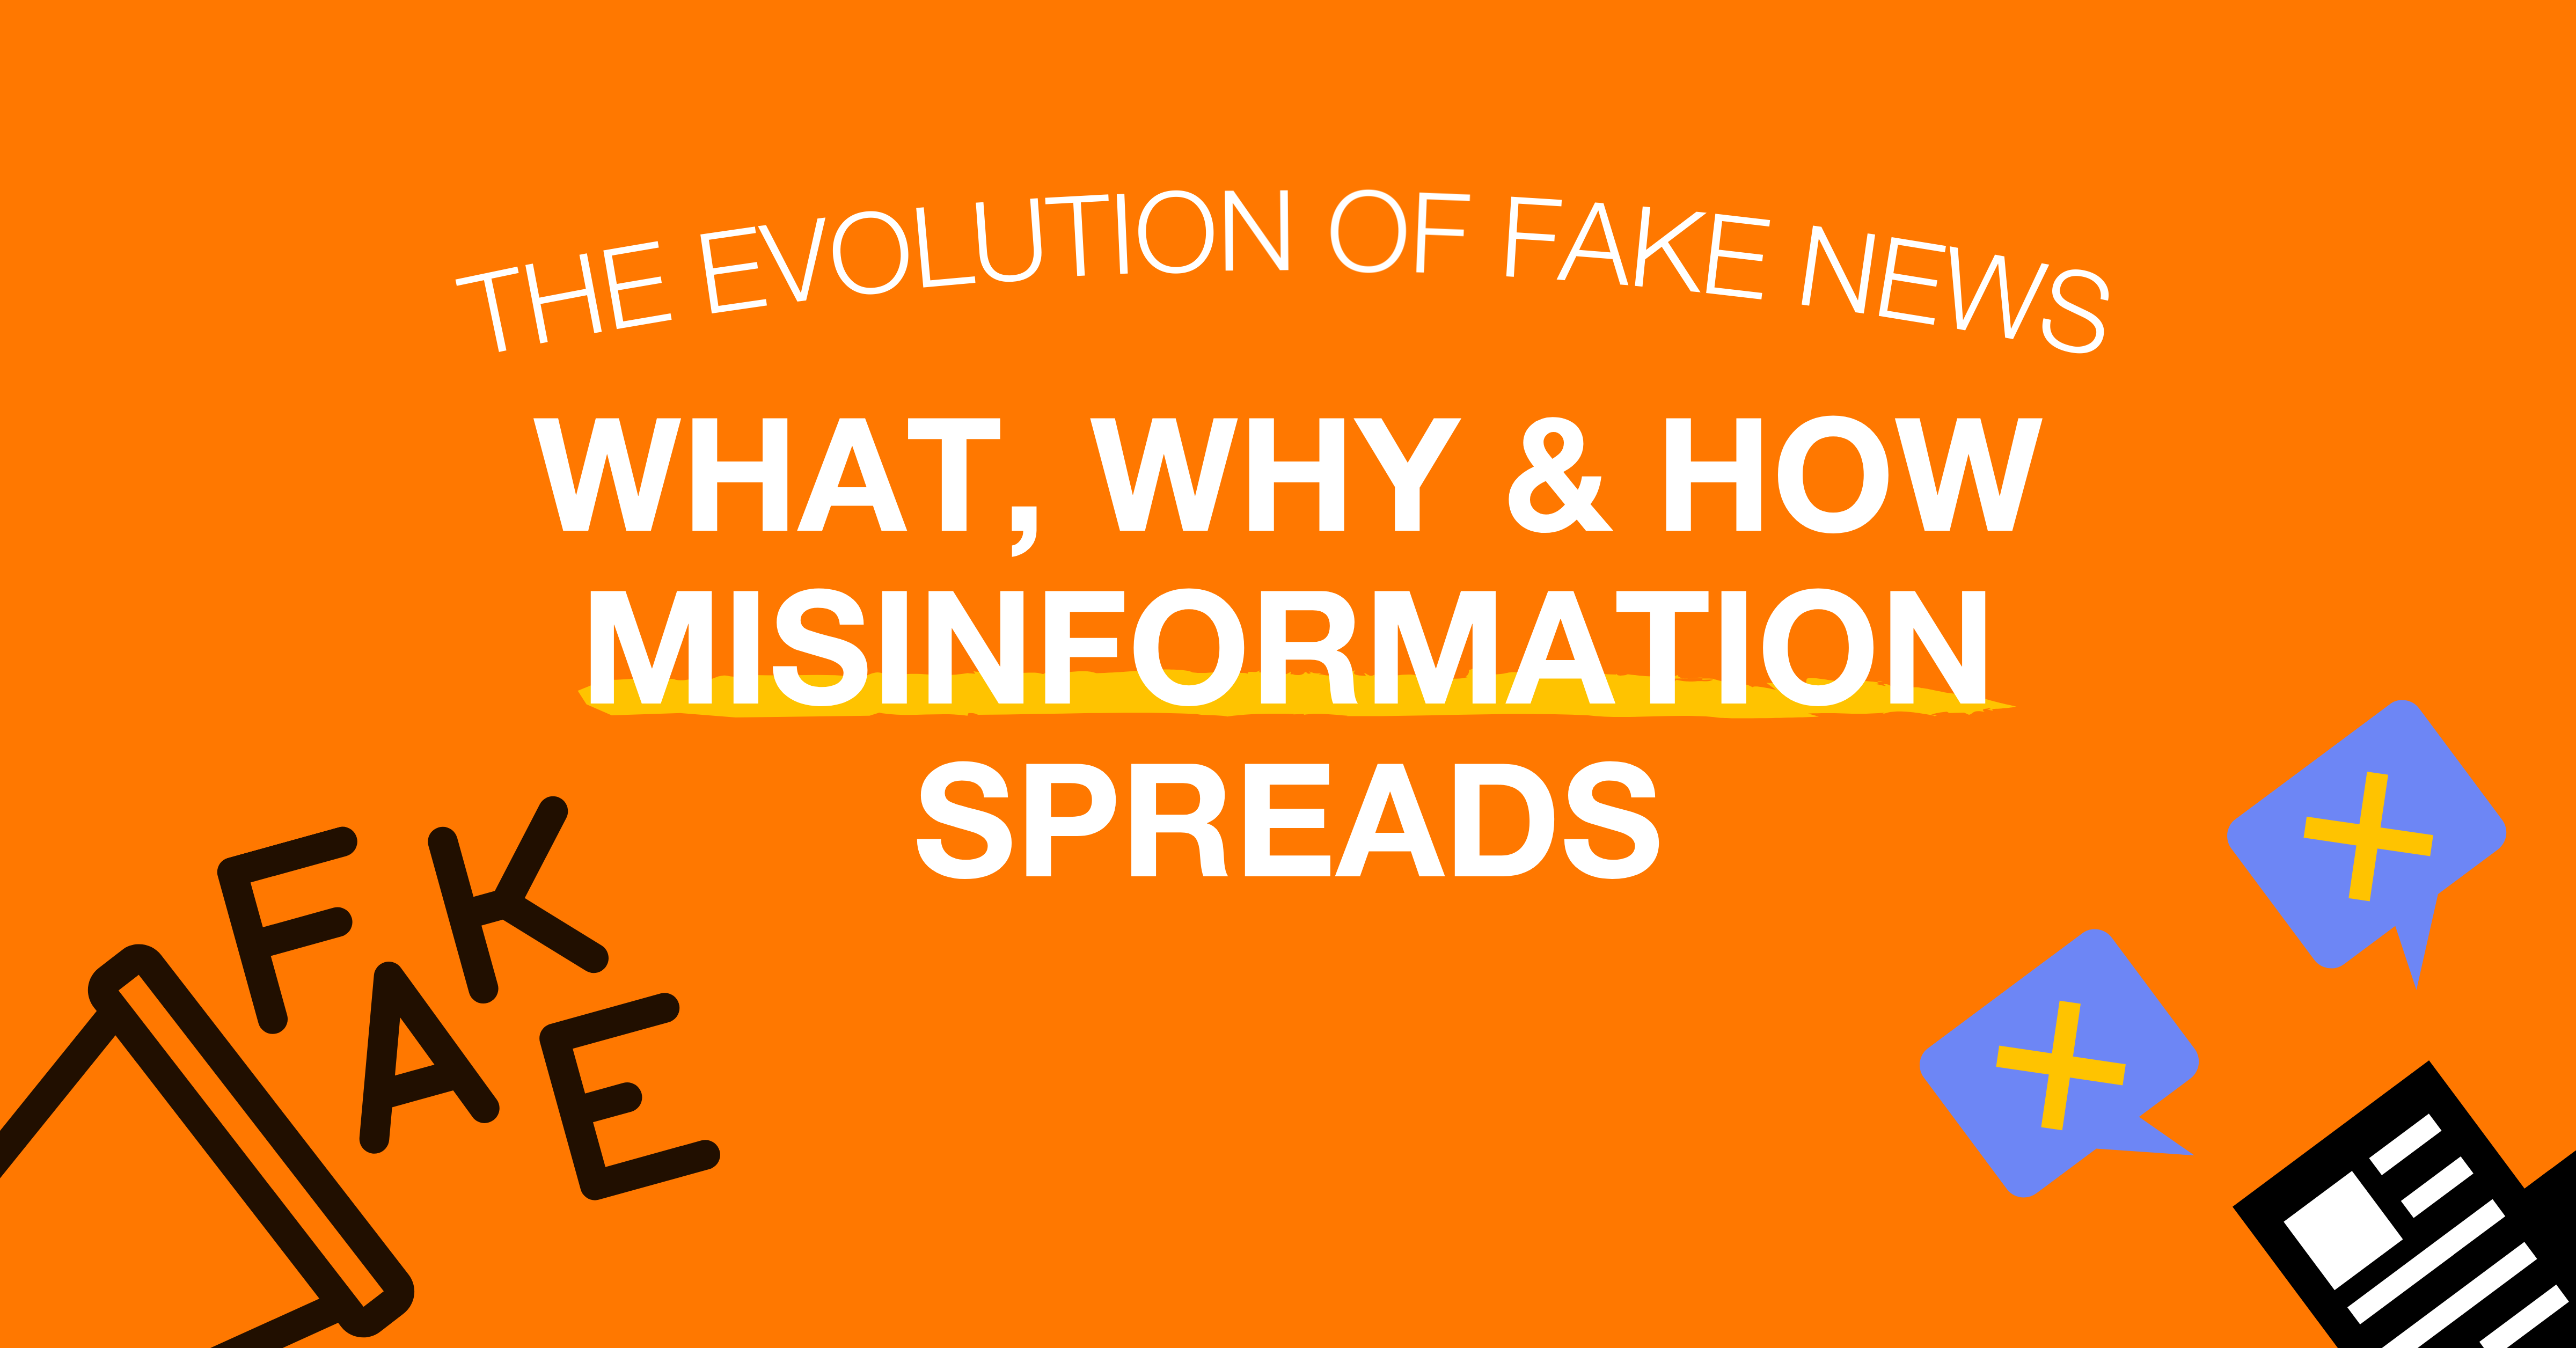 The Evolution of Fake News: What, Why, and How Misinformation Spreads